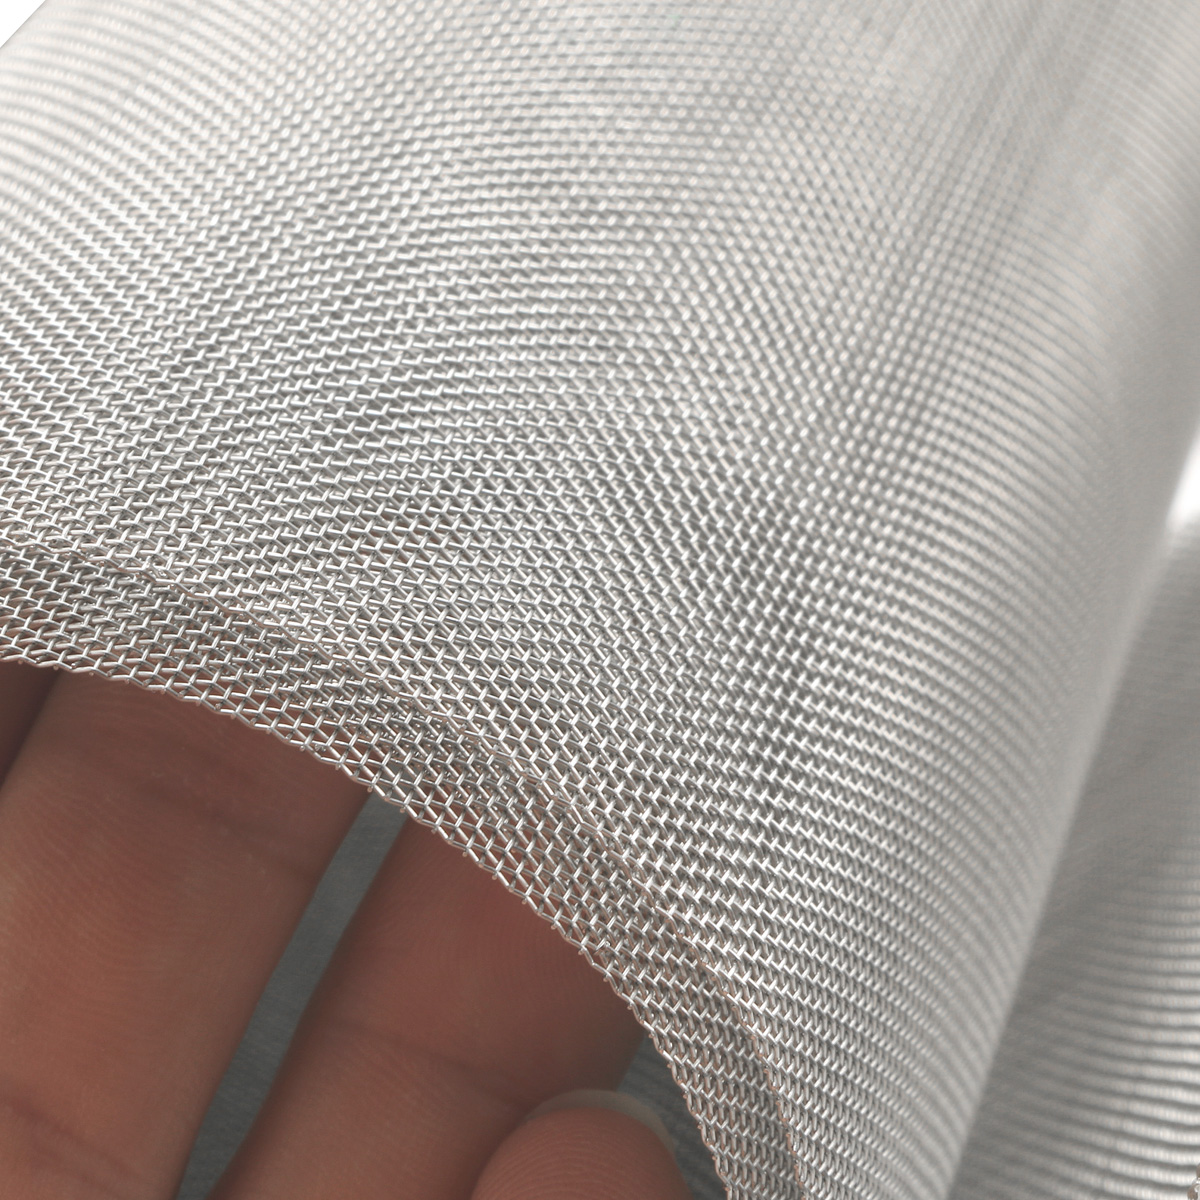 100x15cm-Stainless-Steel-Woven-Wire-Cloth-Screen-Plate-Filtration-Filter-30-Mesh-1145154-3